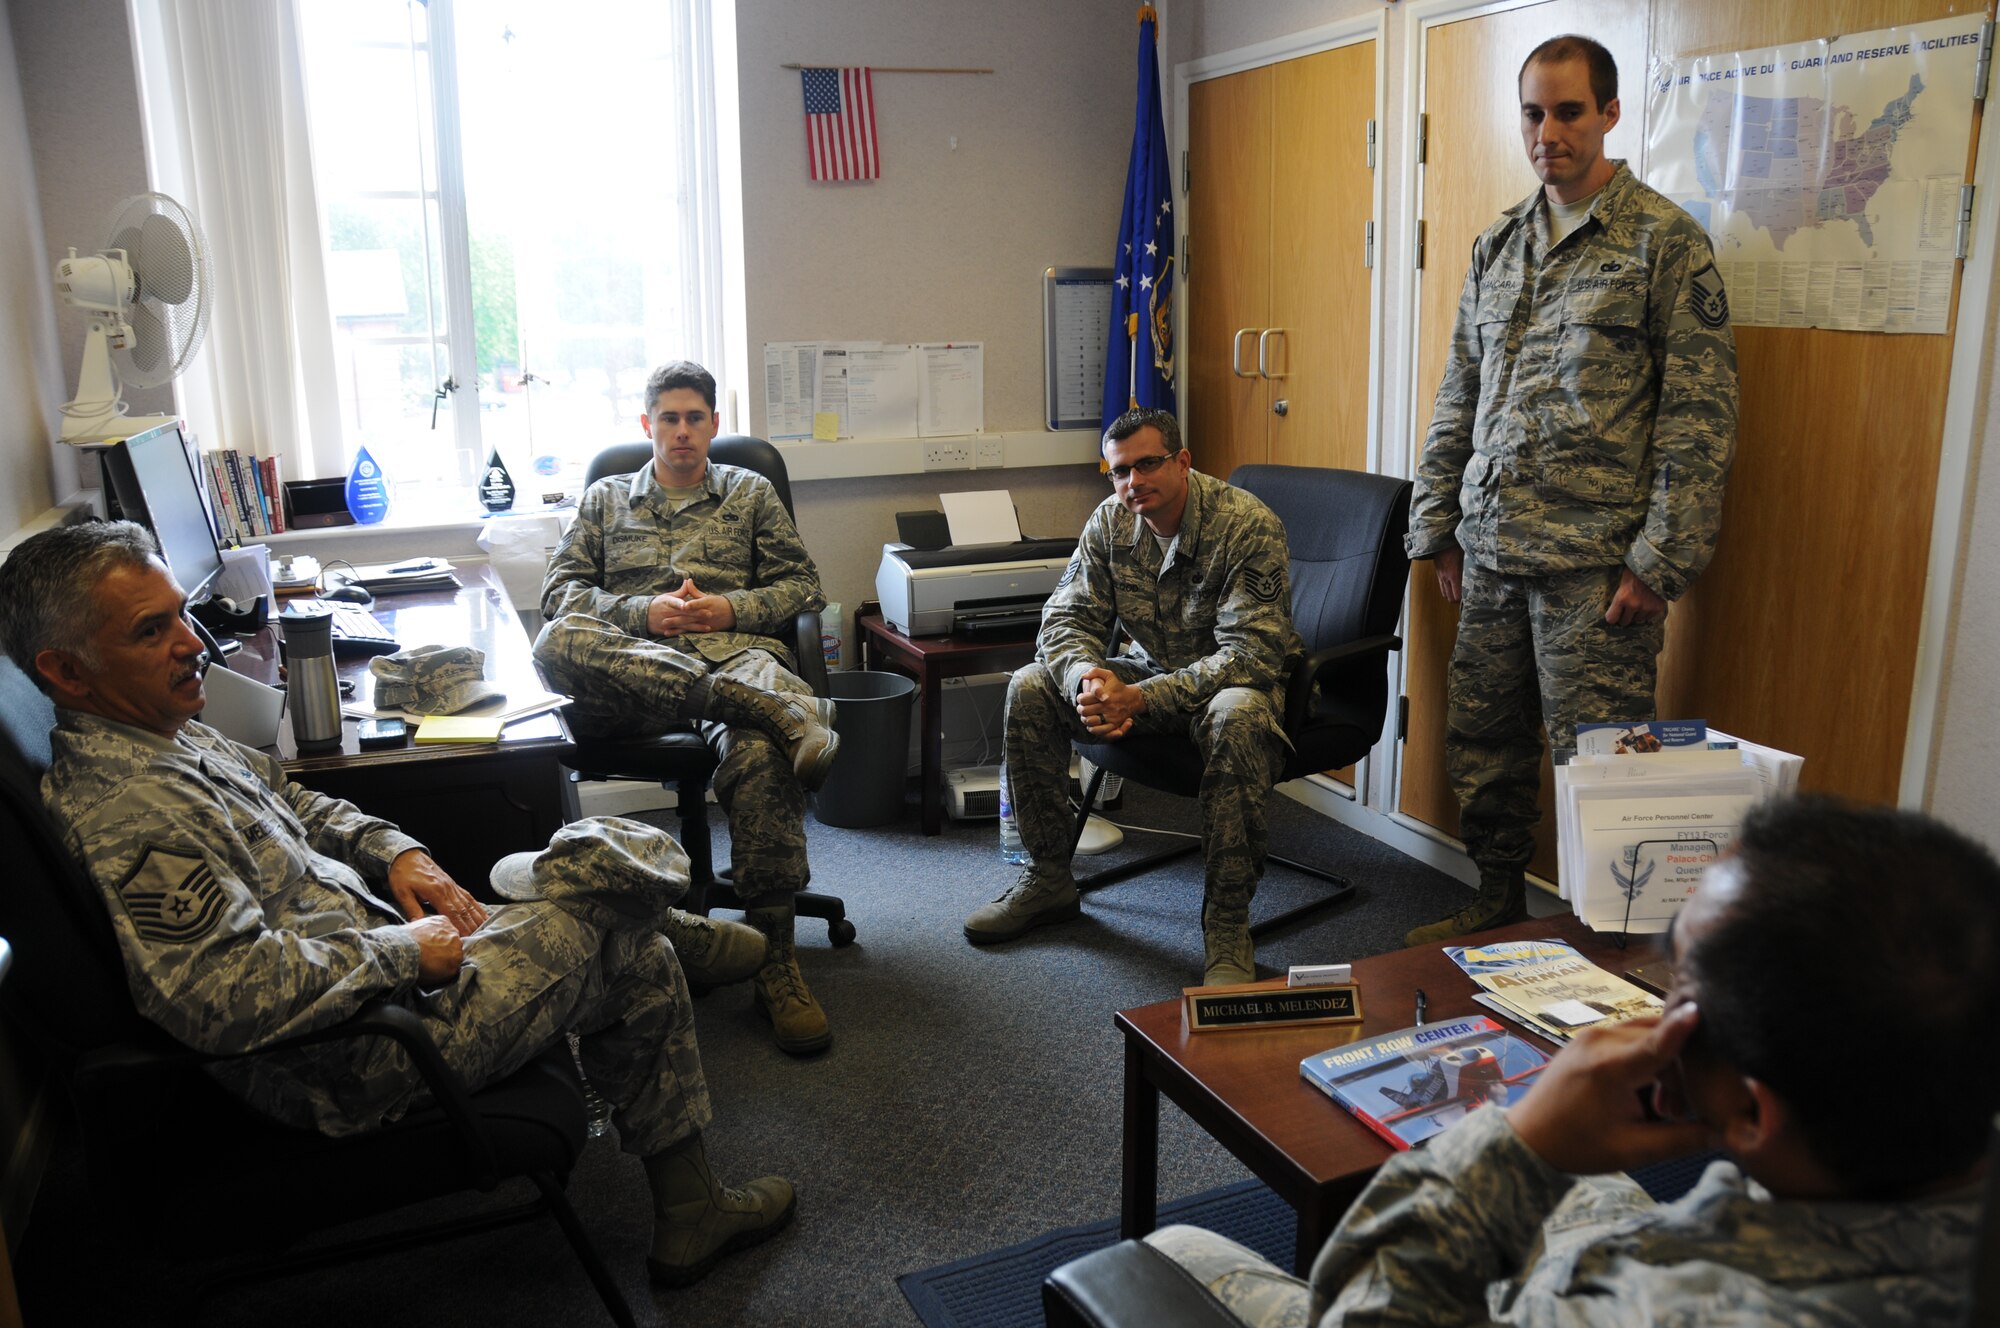 Master Sgt. Michael Melendez, In-Service Recruiter, 100th Air Refueling Wing, RAF Mildenhall, England, along with Tech. Sgts. Donald Blood, Jason Cvancara, and Staff Sgt. Owen Dismuke, all with the 944th FW, Luke Air Force Base, Ariz. speak with an Airmen due to separate soon from active duty about the benefits of joining the Air Force Reserve.  Sgts. Blood, Cvancara, and Dismuke spent their time on annual tour at RAF Mildenhall supporting MSgt. Melendez in his recruiting efforts.  (US Air Force photo by Staff Sgt. Josh Nason)